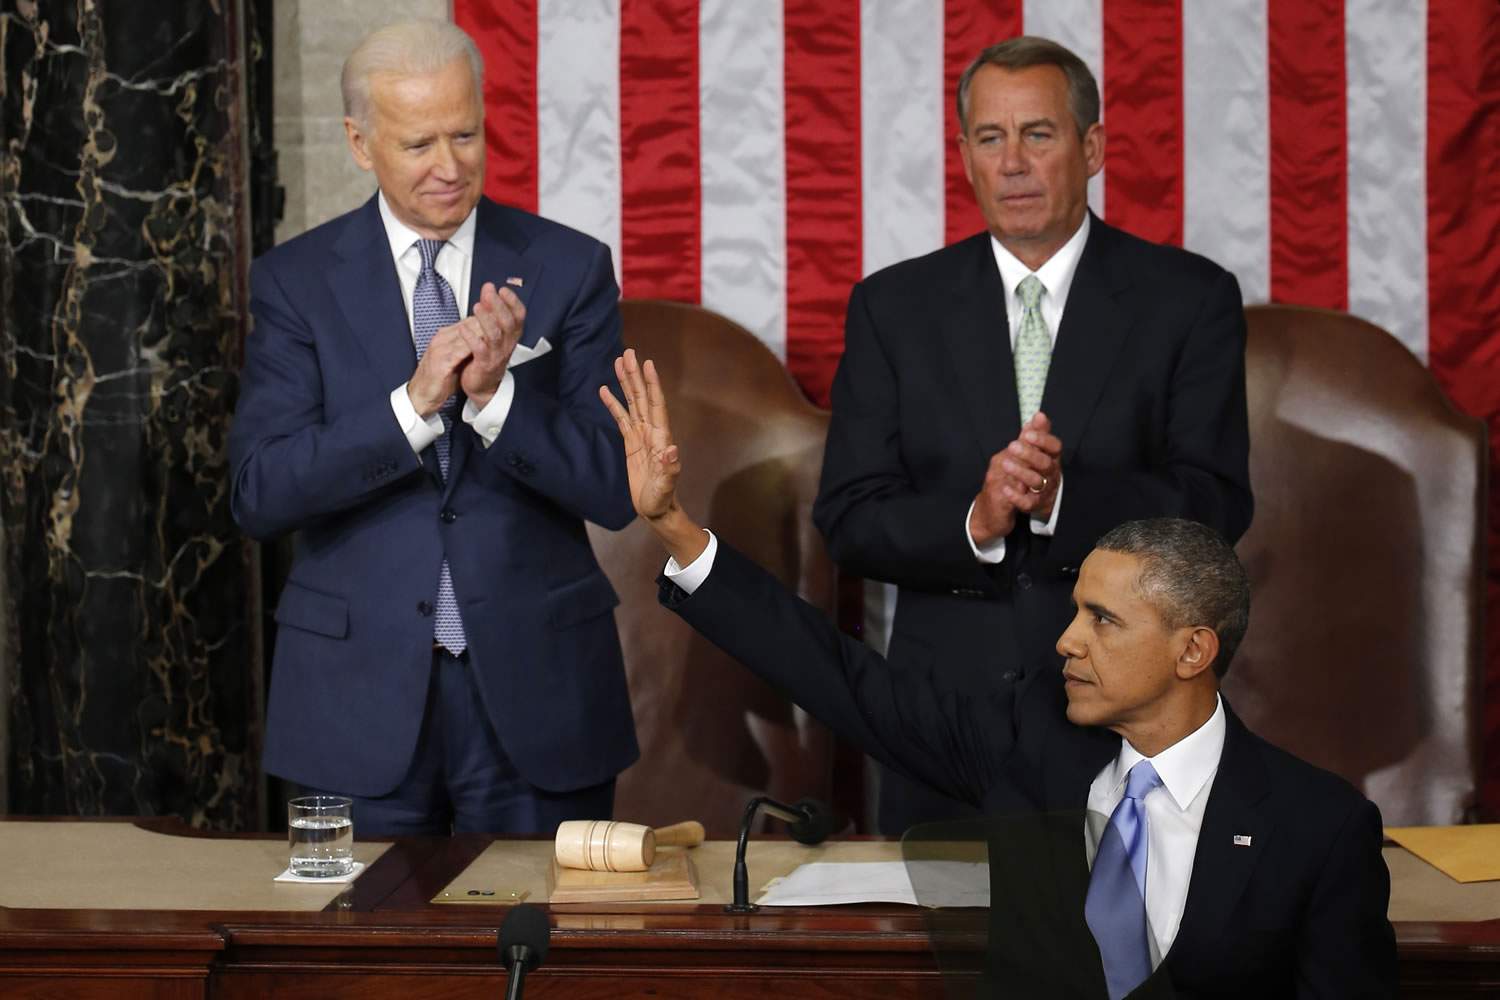 President Barack Obama waves after giving his State of the Union address on Capitol Hill in Washington on Tuesday.